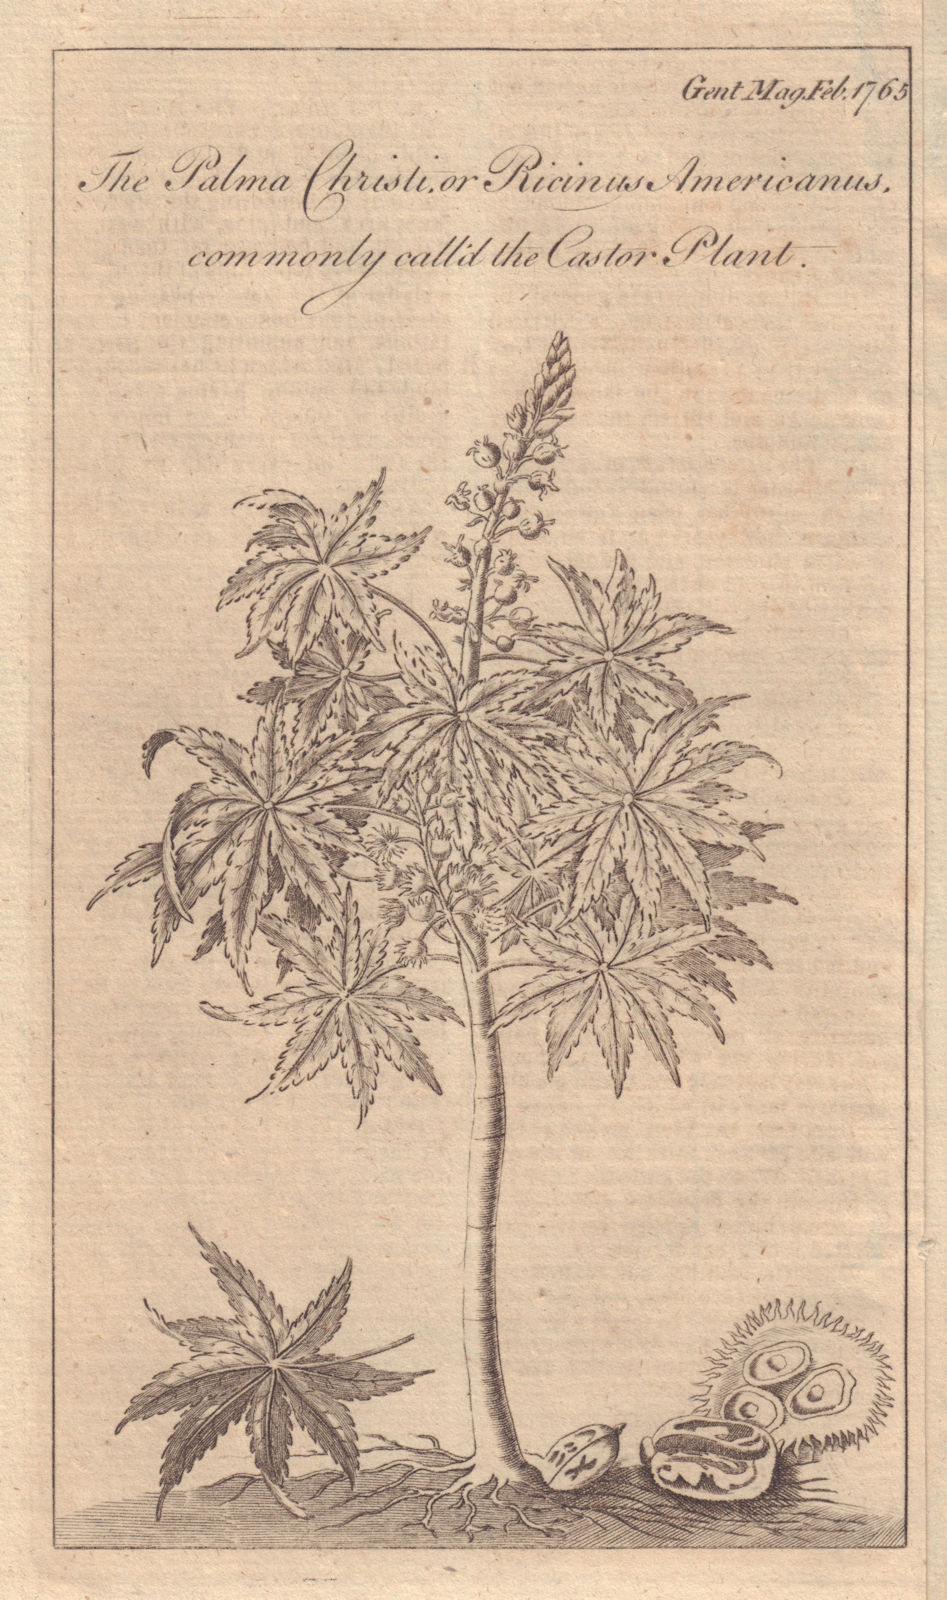 Associate Product The Palma Christi or Ricinus Americanus commonly called the Castor Plant 1765